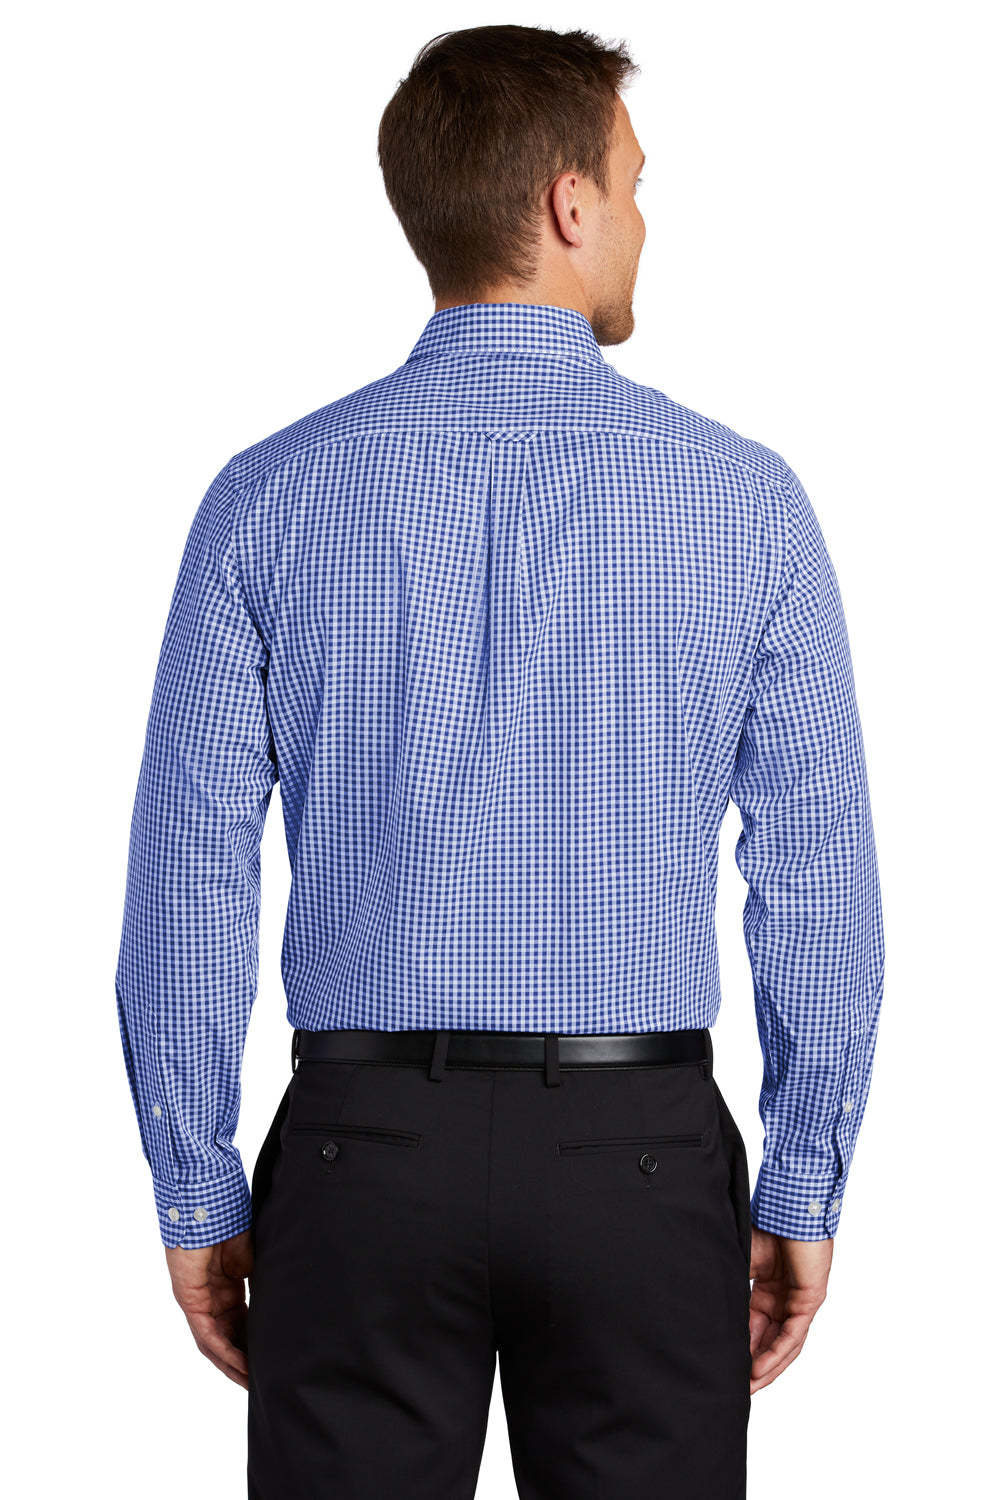 Port Authority Mens Broadcloth Gingham Long Sleeve Button Down Shirt w/ Pocket True Royal Blue/White Side